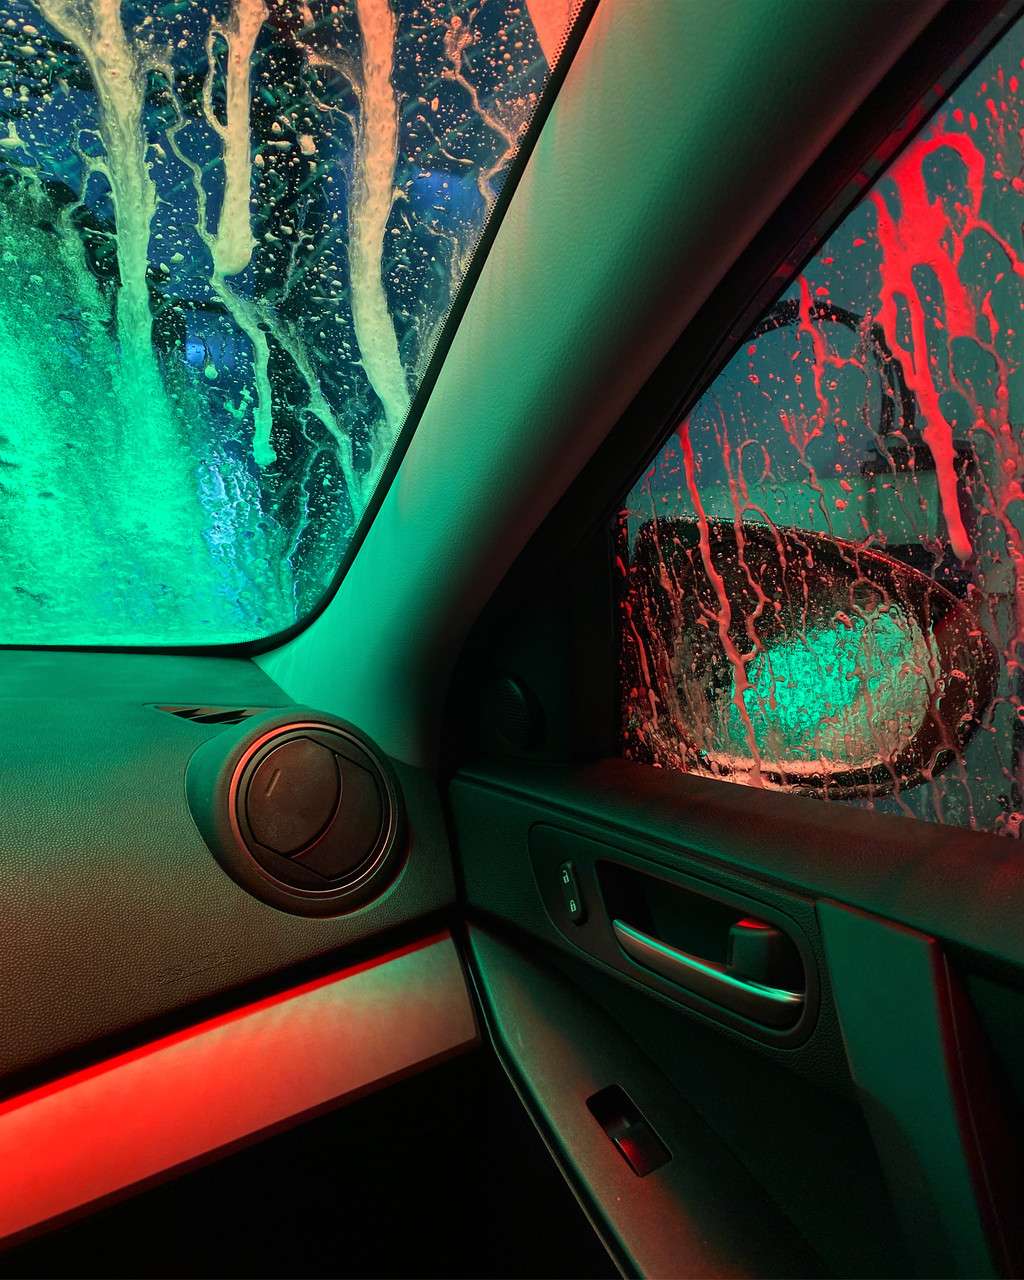 Archival inkjet prints on Canson Platine Fibre Rag by Lindsay Metivier, the inside of a car during automated car wash